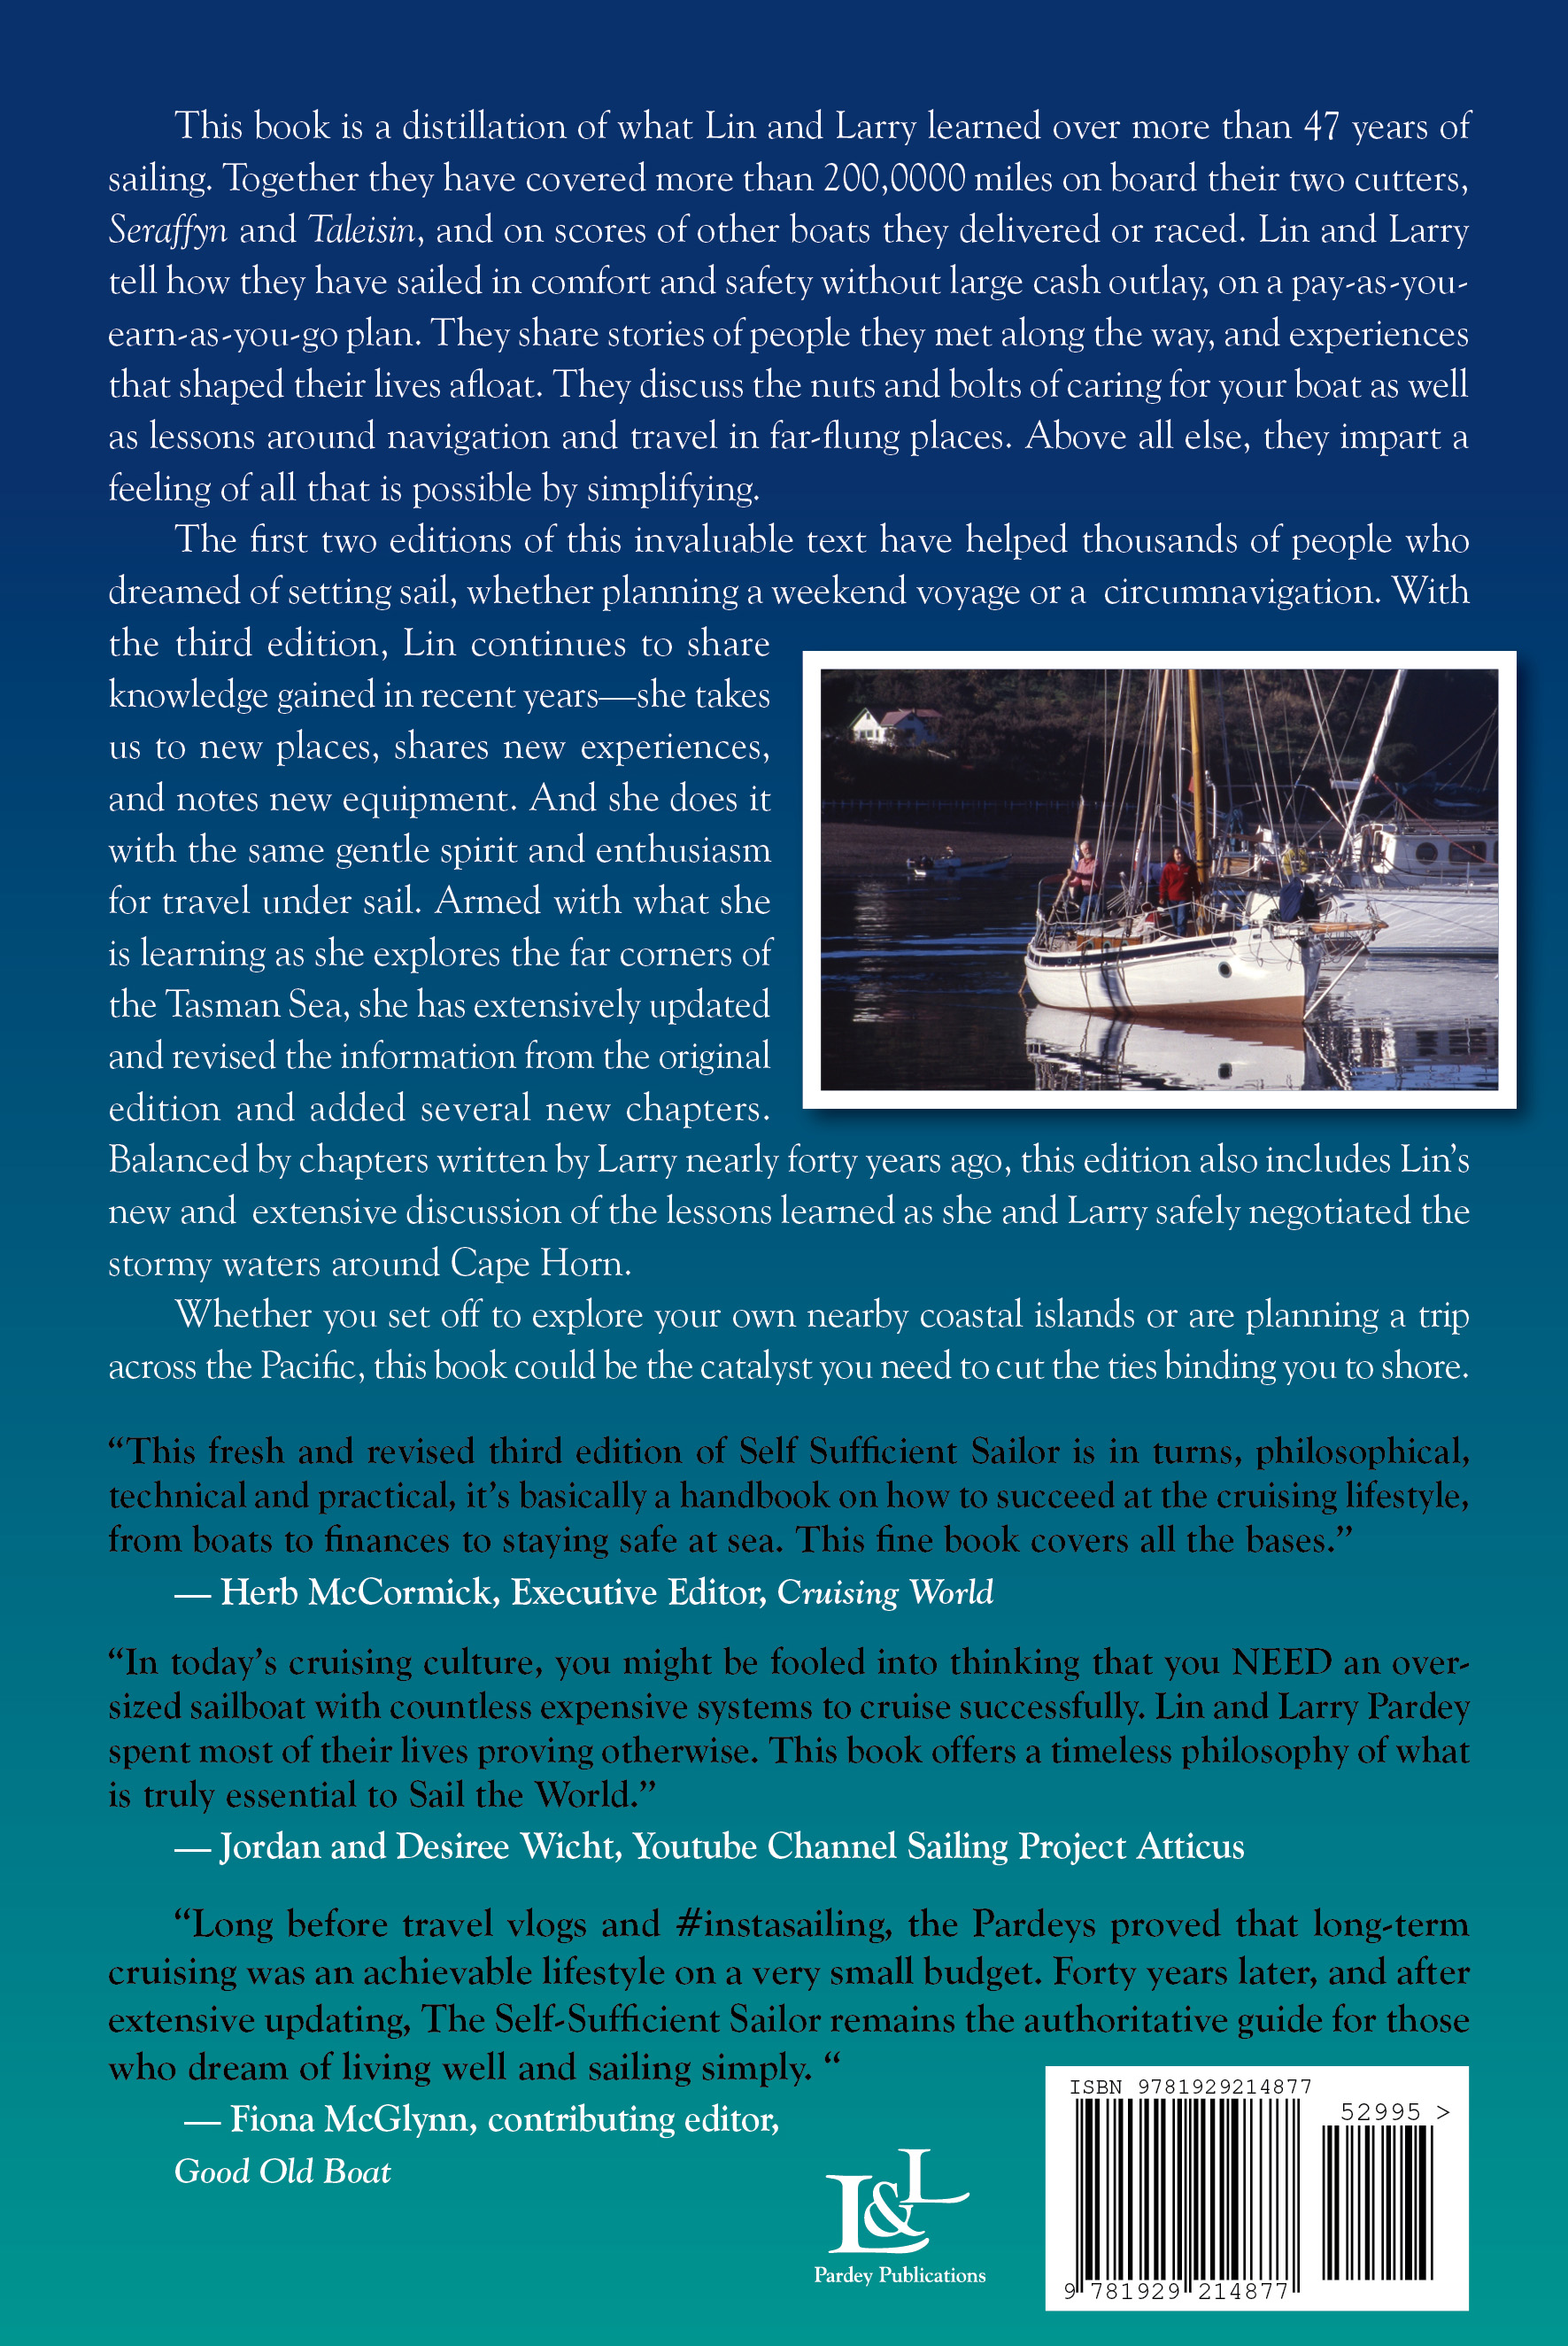 Lin & Larry Pardey, Self Sufficient Sailor 3rd edition– full revised and expanded